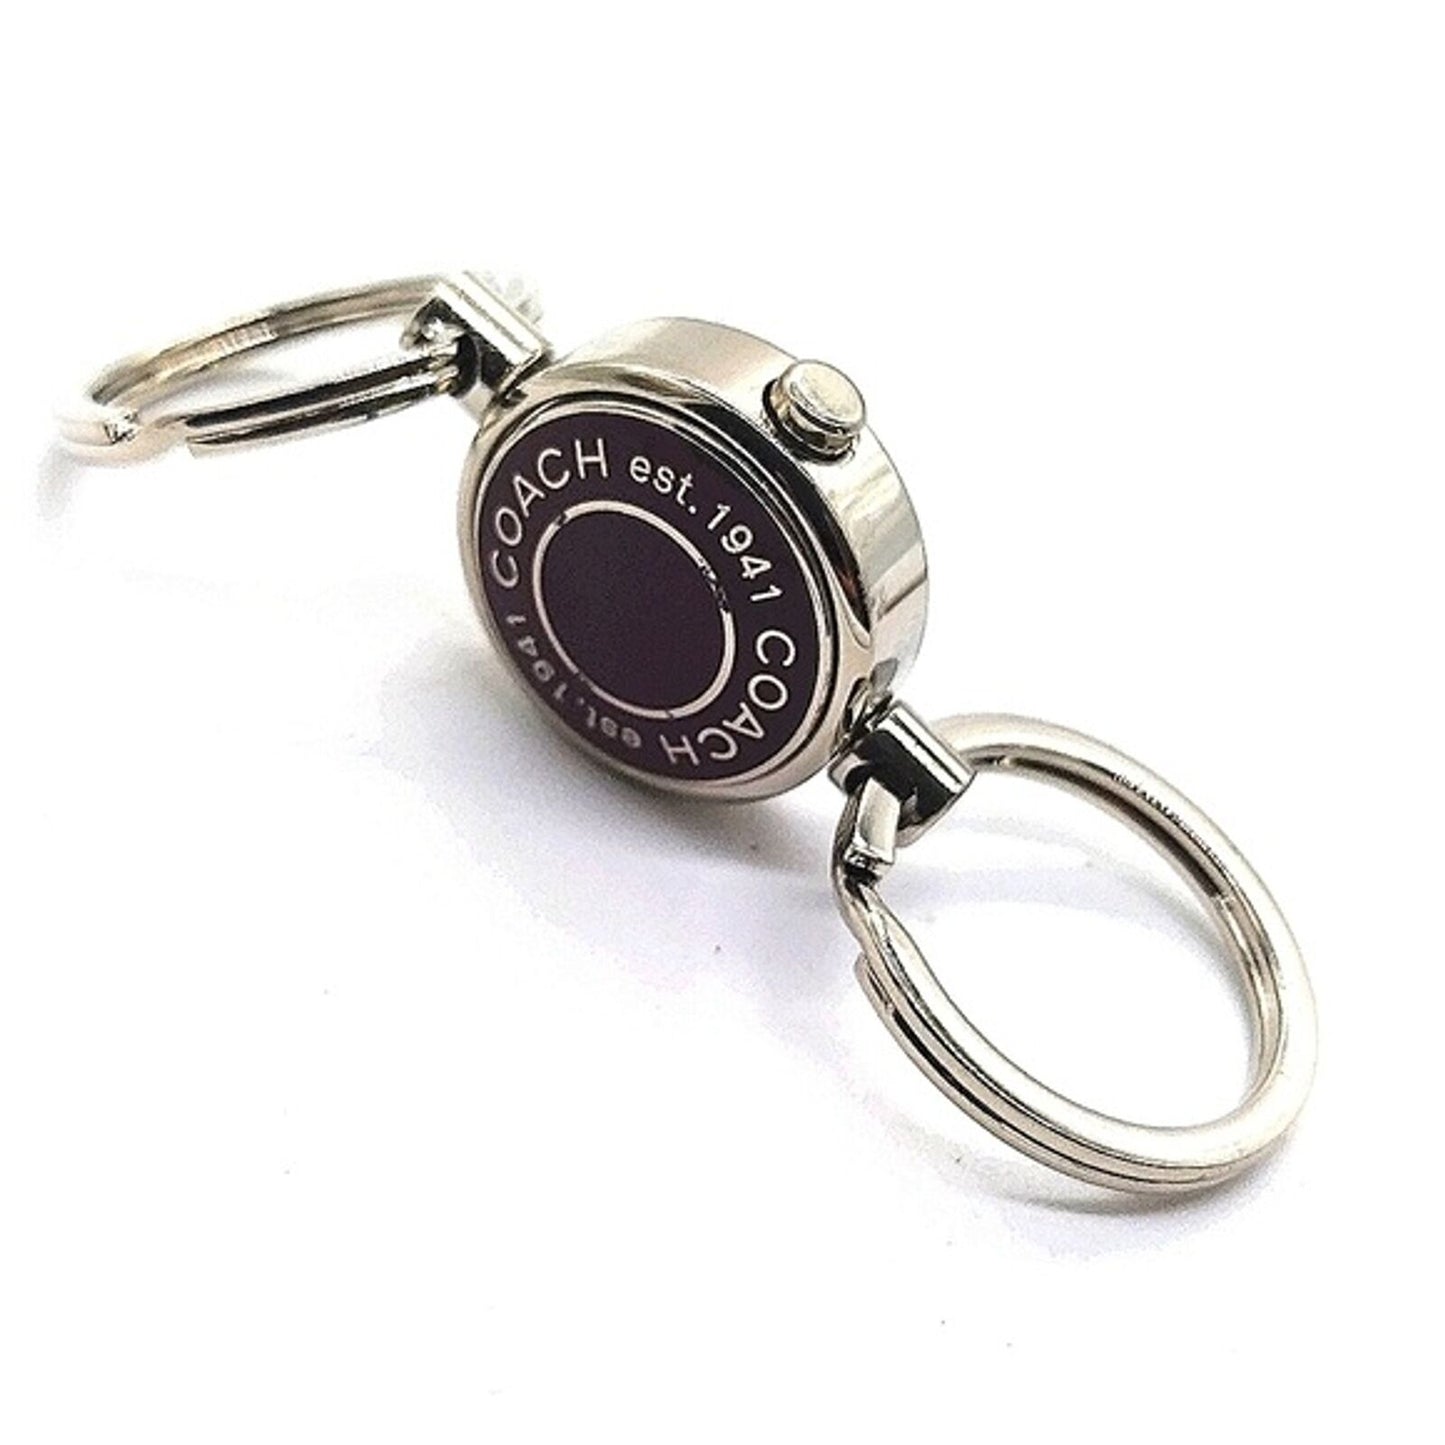 COACH Vintage Burgundy Dual Keychain fob with Release for Valet